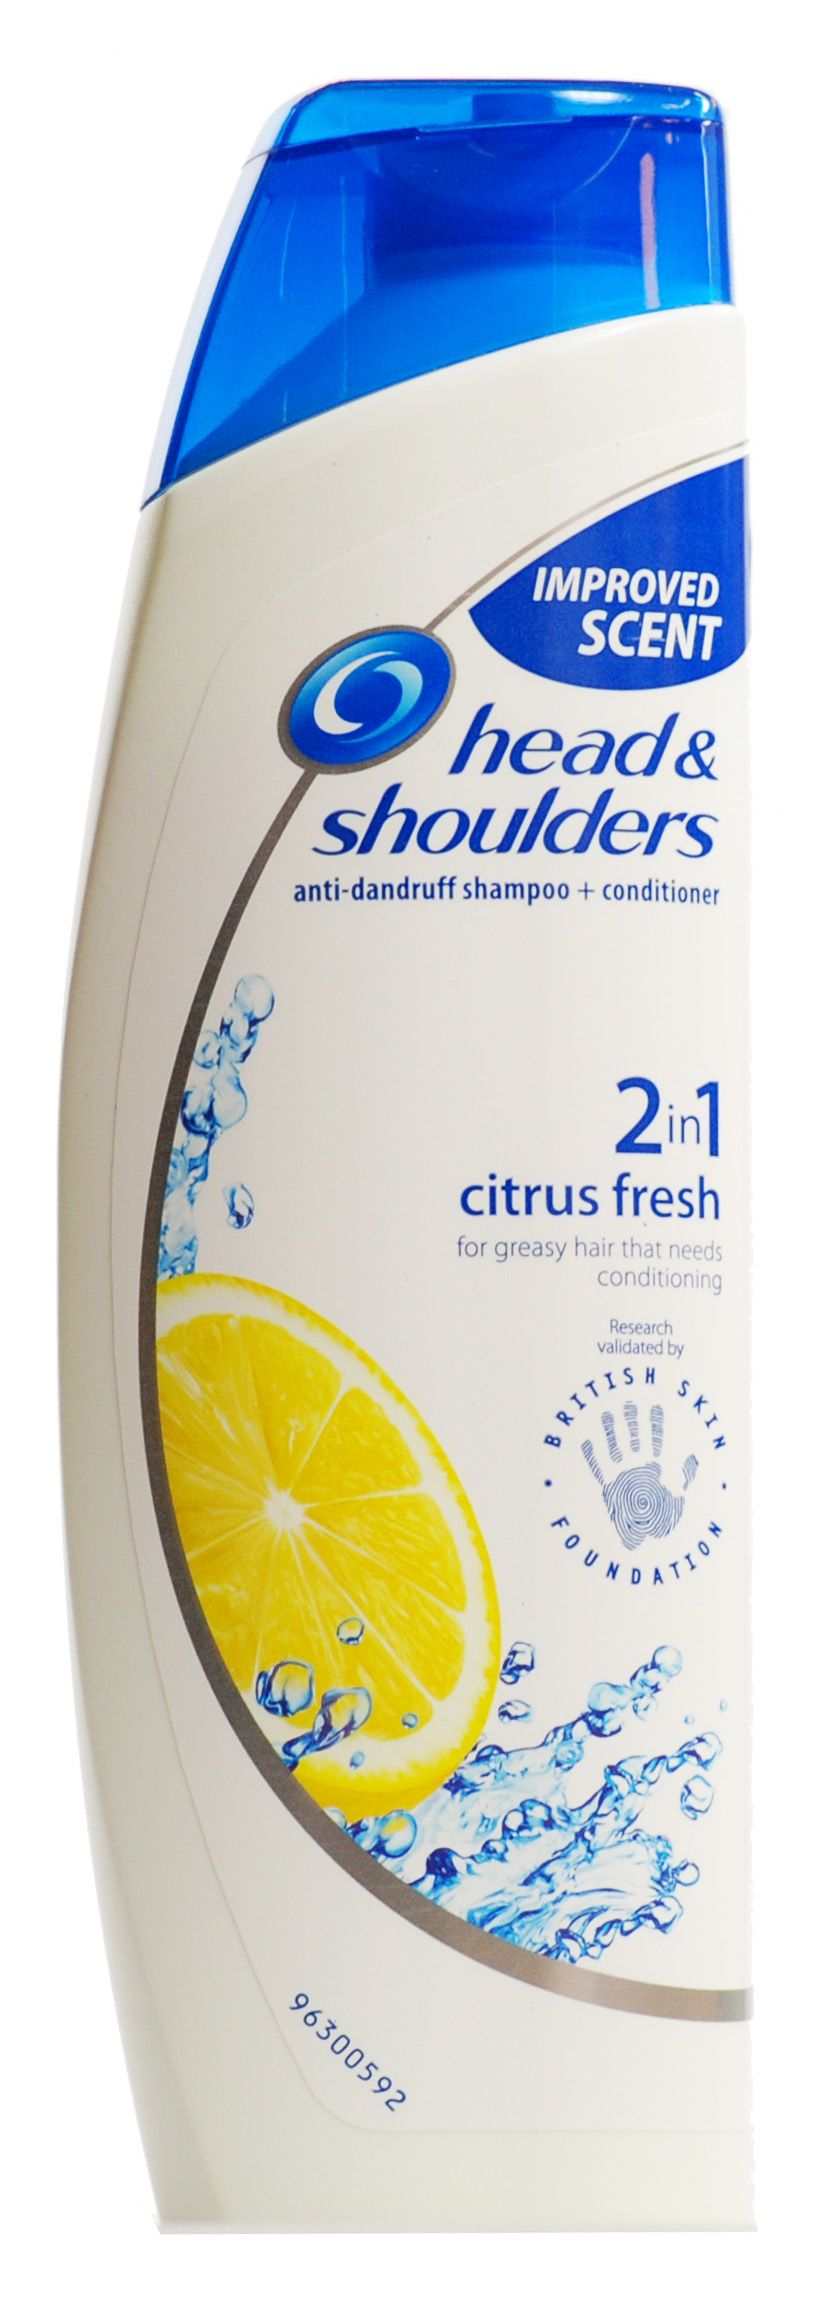 Best shampoo for greasy hair TheFuss.co.uk